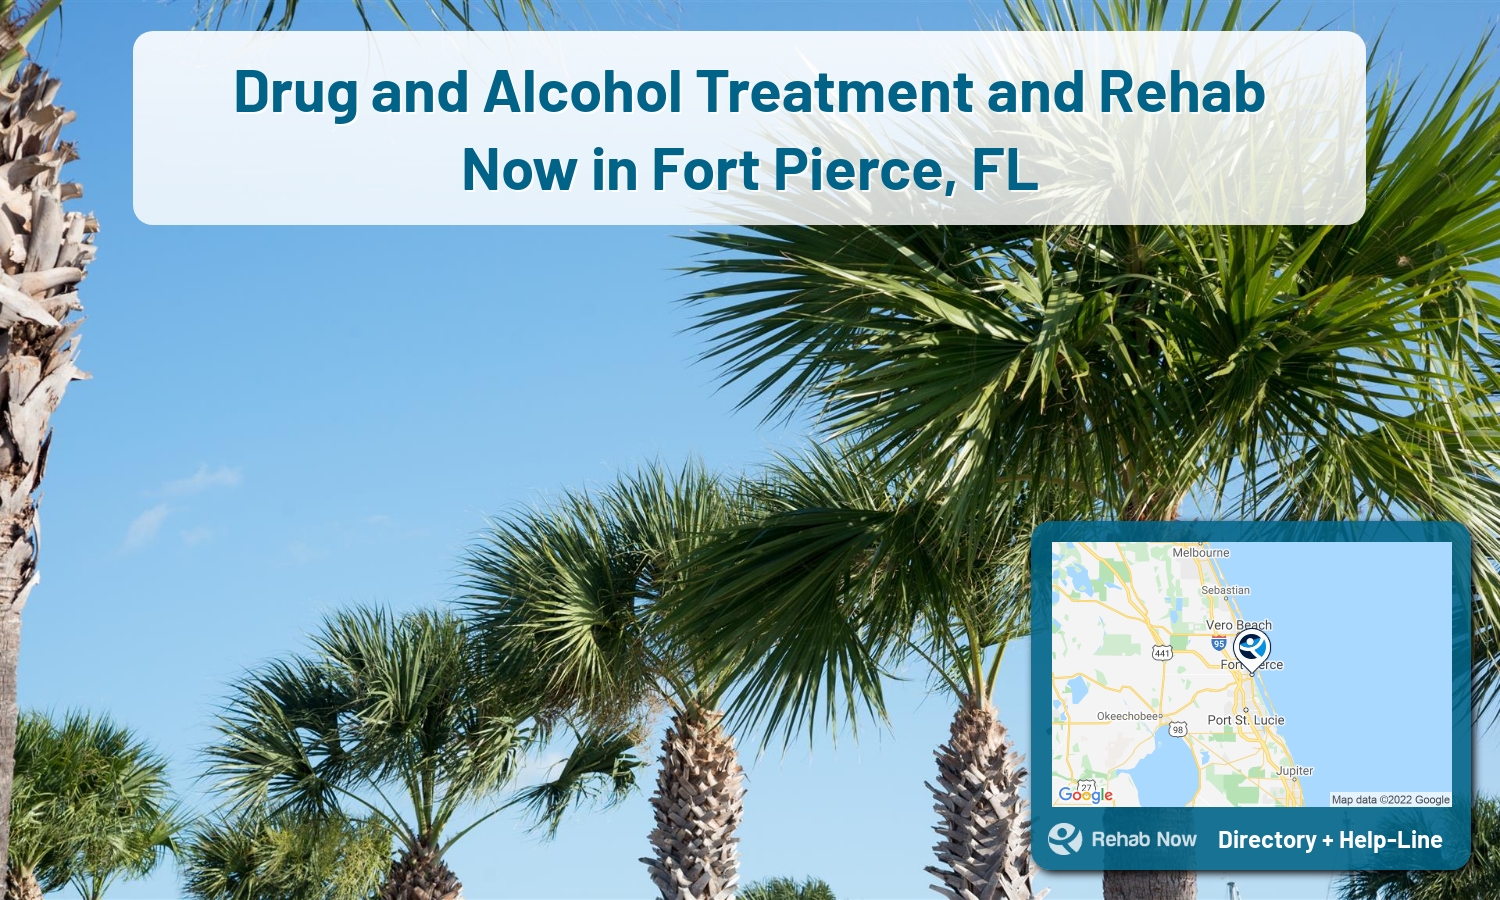 Fort Pierce, FL Treatment Centers. Find drug rehab in Fort Pierce, Florida, or detox and treatment programs. Get the right help now!